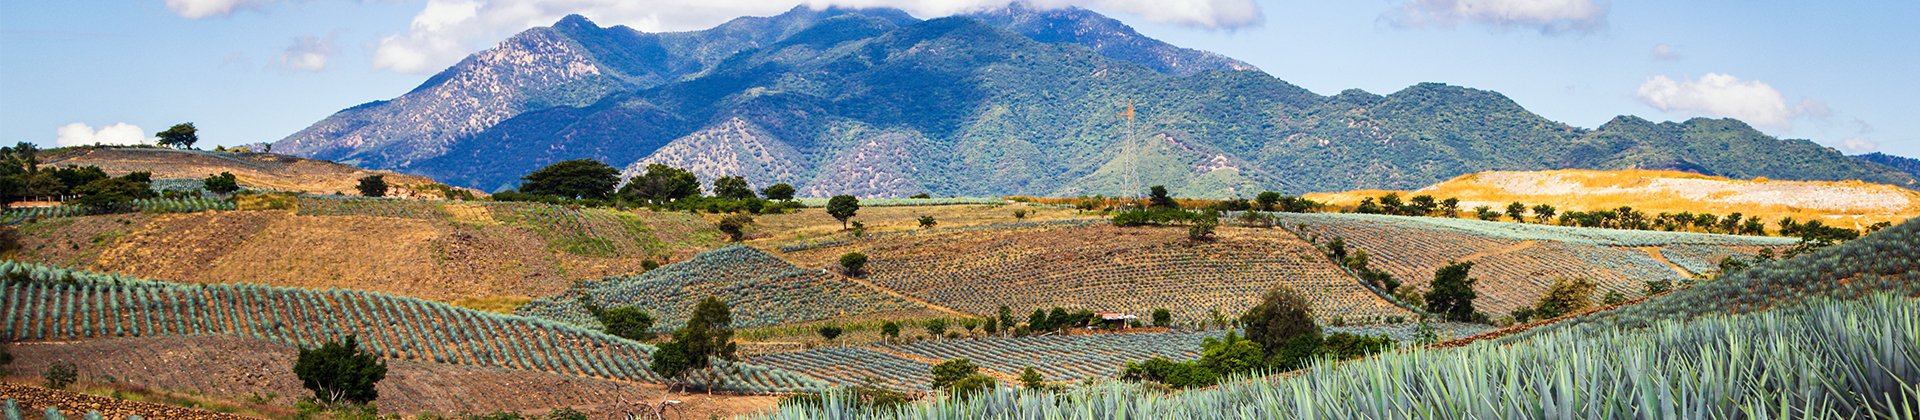 Agave field in Tequila